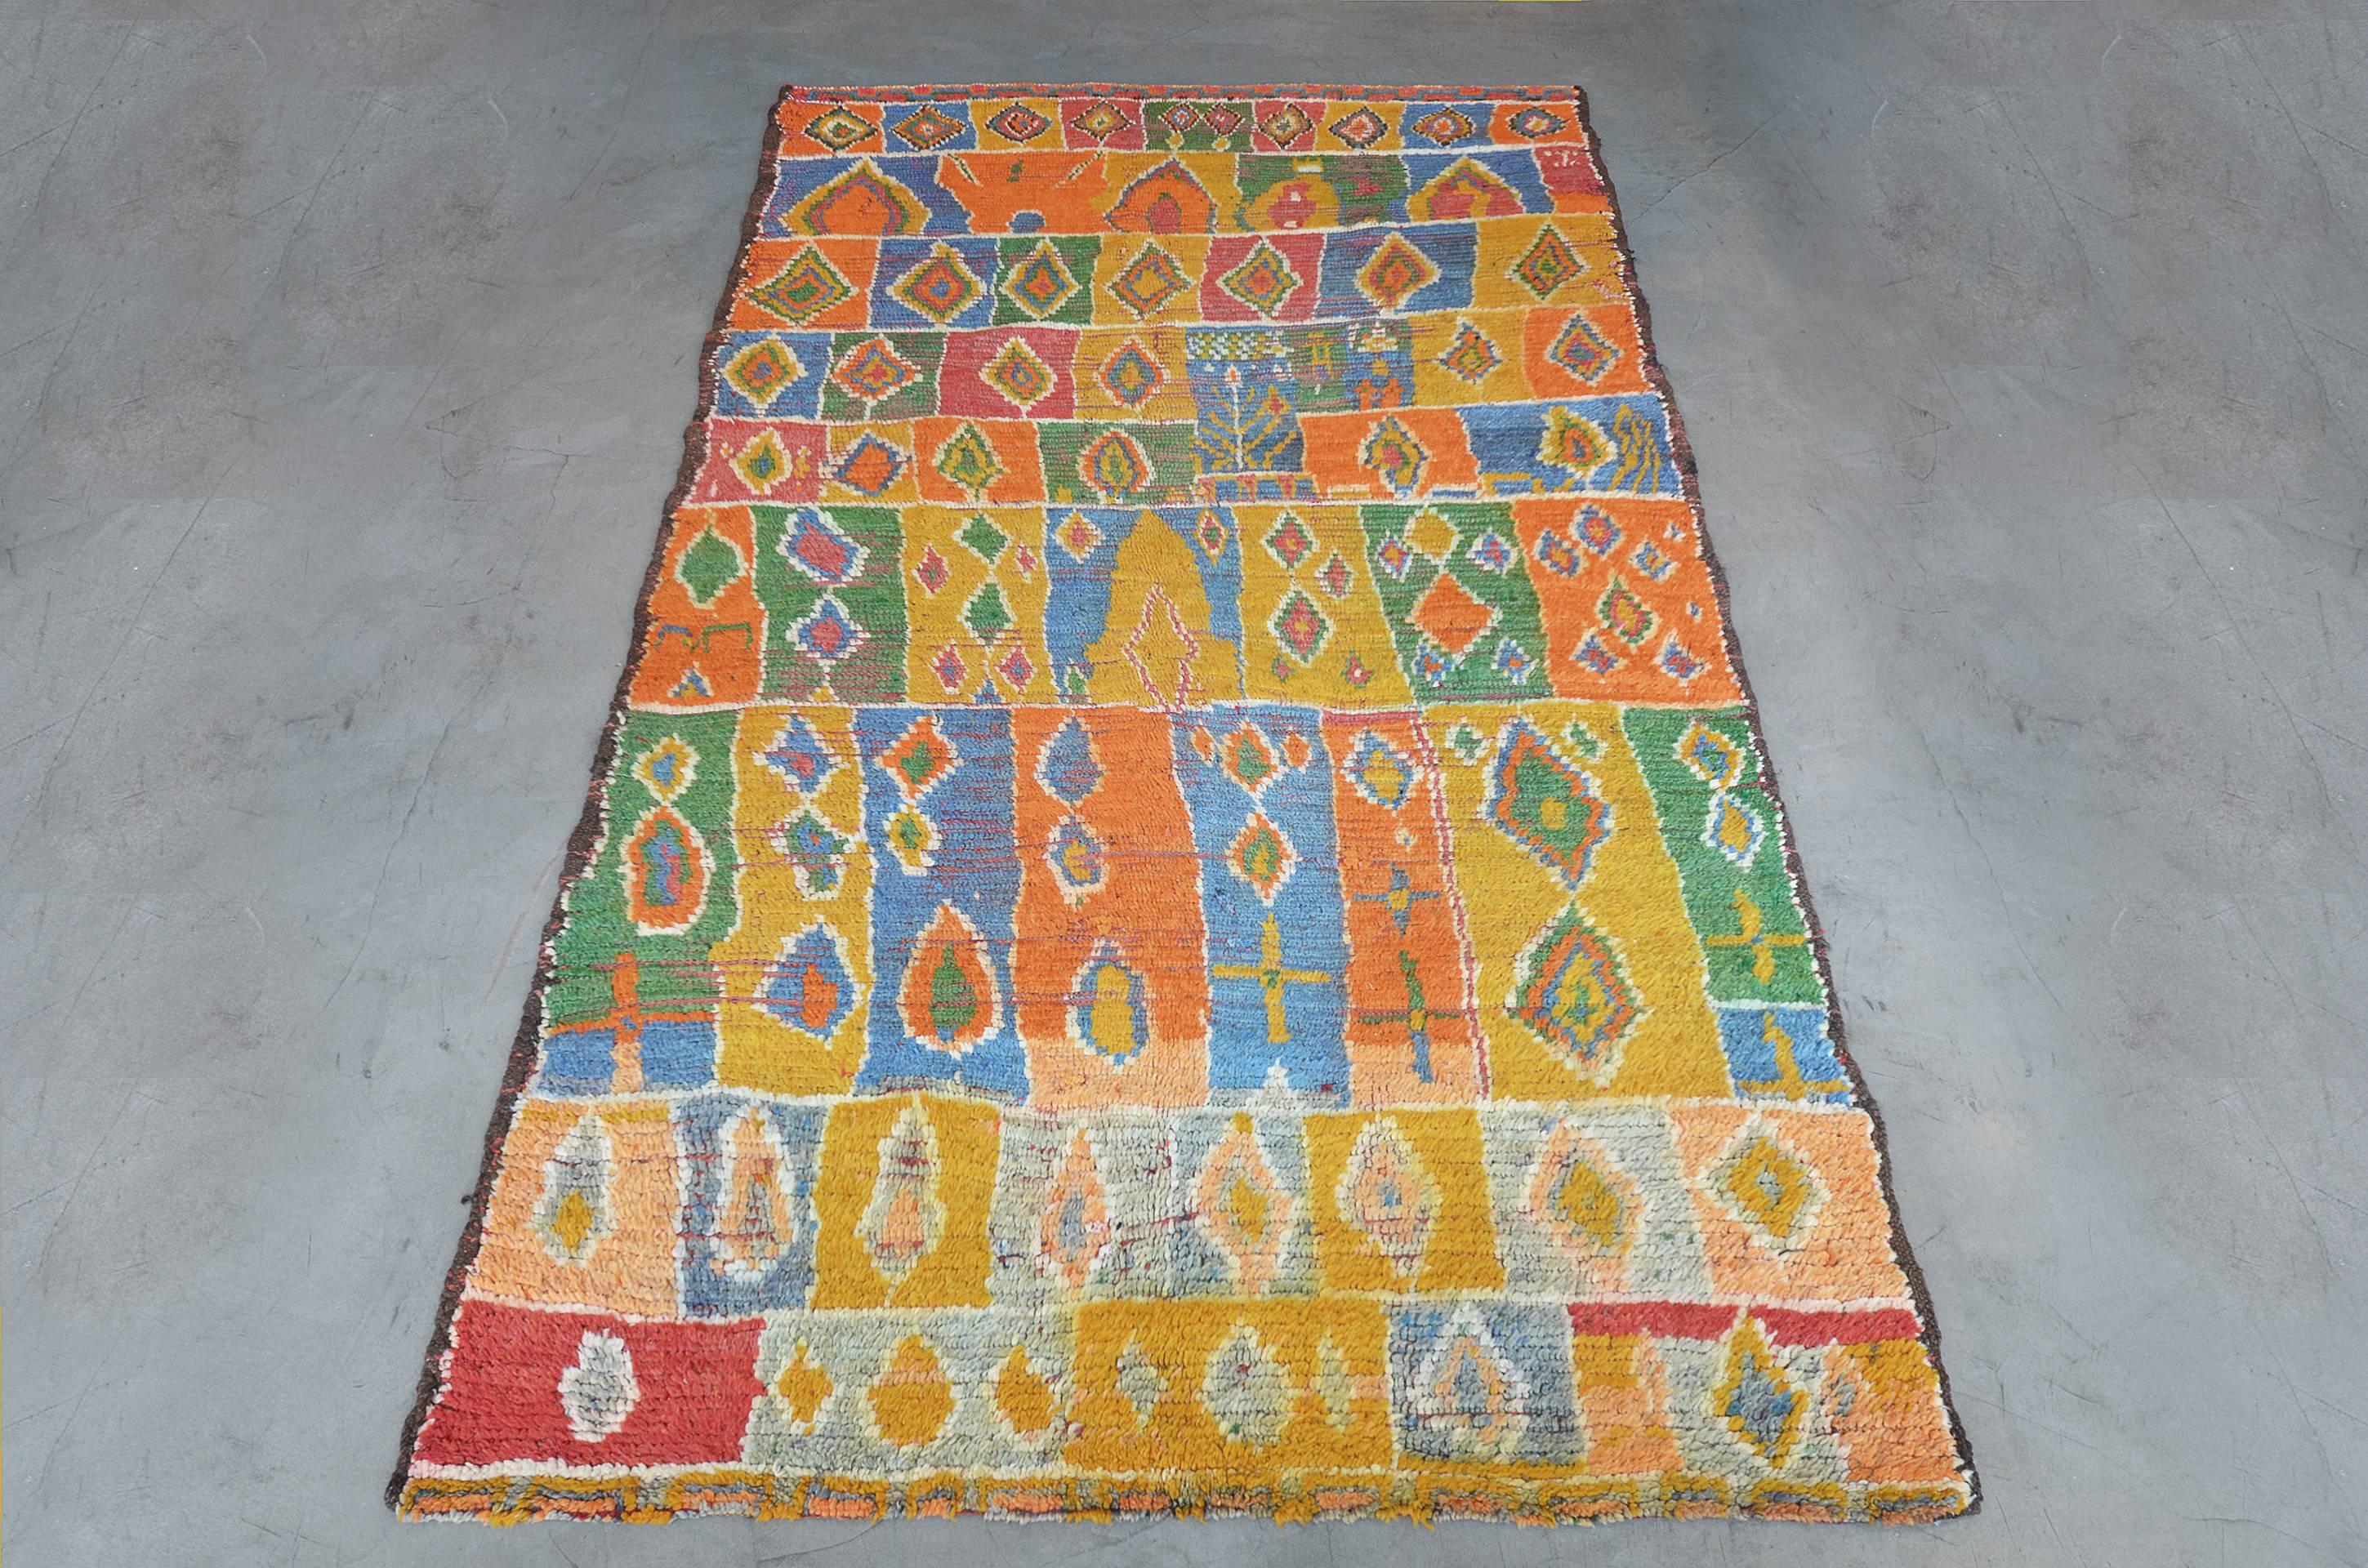 This vintage Moroccan rug features a field with an overall design of linked polychromatic square and rectangular panels of light grey, rust-red, shaded blue, burnt-orange, bottle-green and mustard yellow each panel containing angular floral motifs.